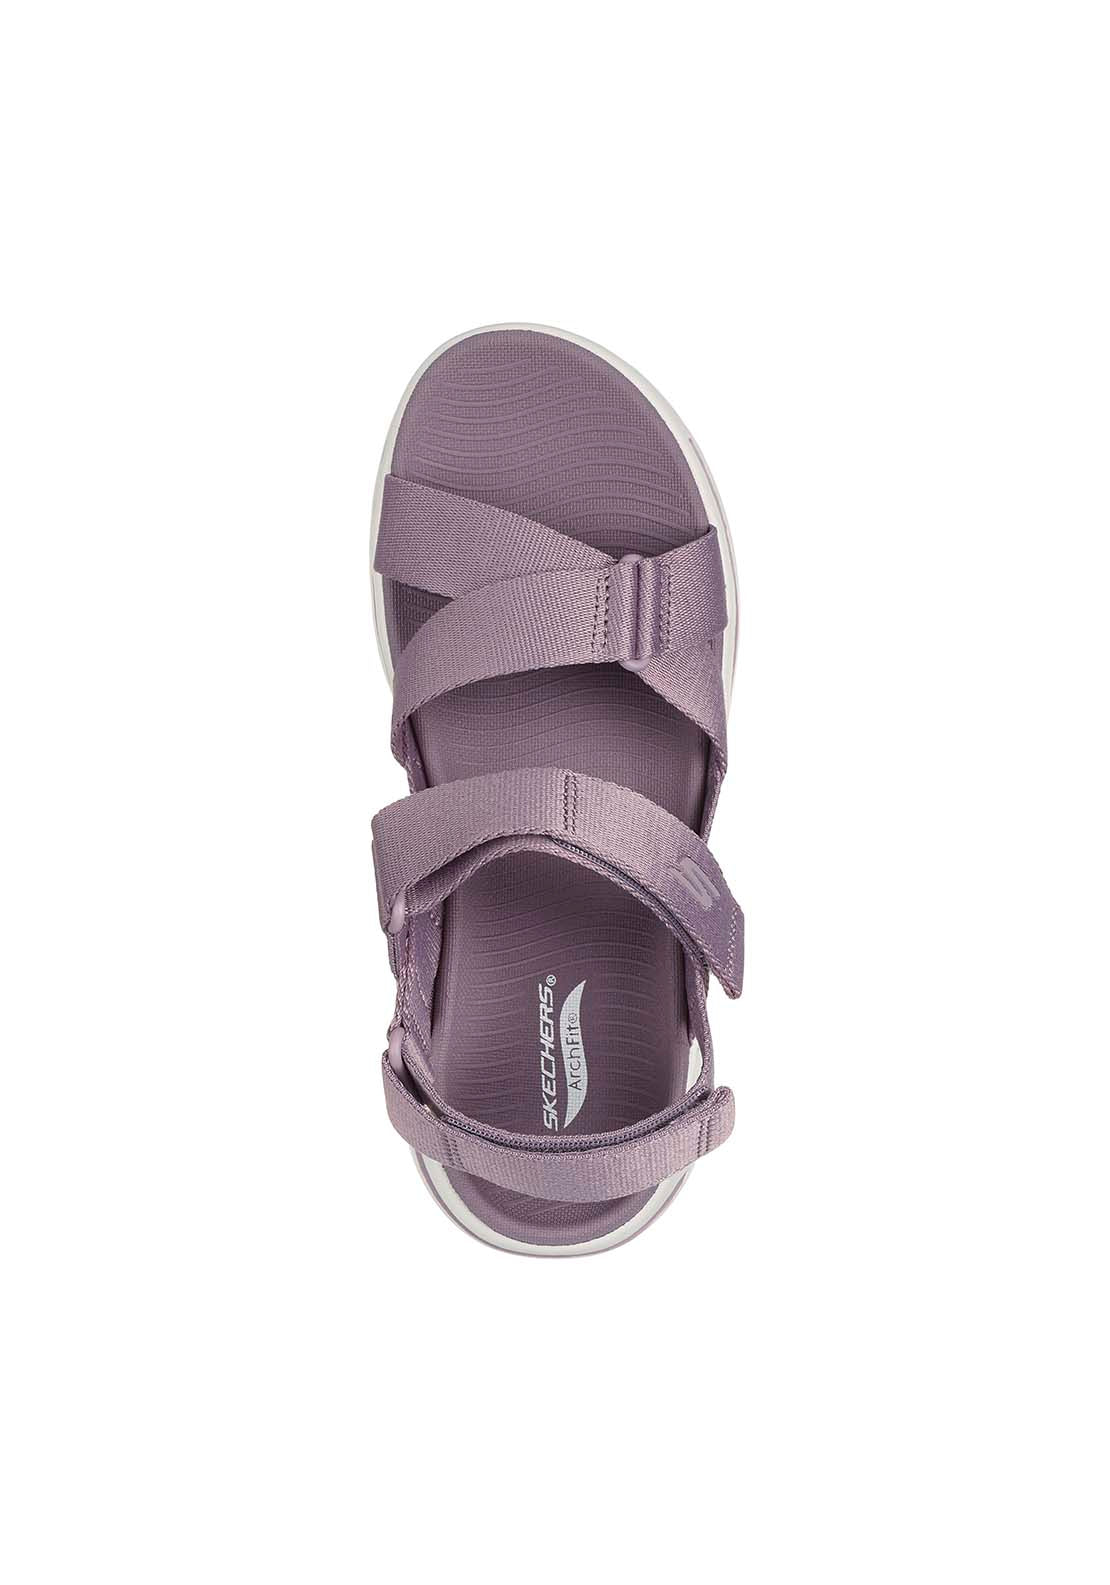 Skechers Go Walk Arch Fit Sandal 3 Shaws Department Stores